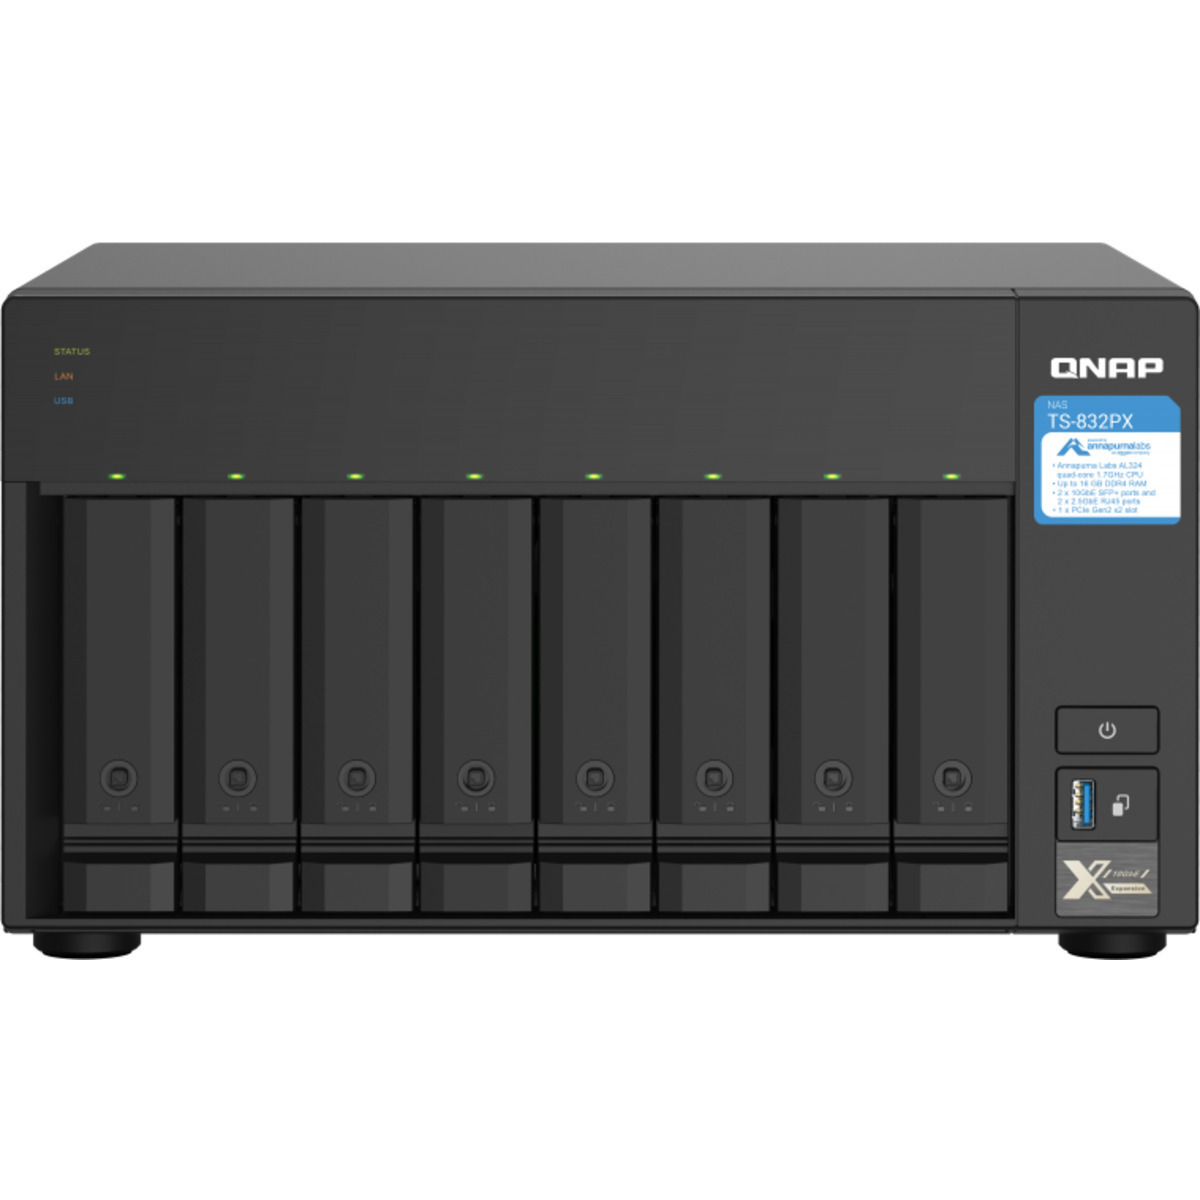 QNAP TS-832PX 40tb 8-Bay Desktop Multimedia / Power User / Business NAS - Network Attached Storage Device 5x8tb Western Digital Ultrastar DC HC320 HUS728T8TALE6L4 3.5 7200rpm SATA 6Gb/s HDD ENTERPRISE Class Drives Installed - Burn-In Tested - FREE RAM UPGRADE TS-832PX